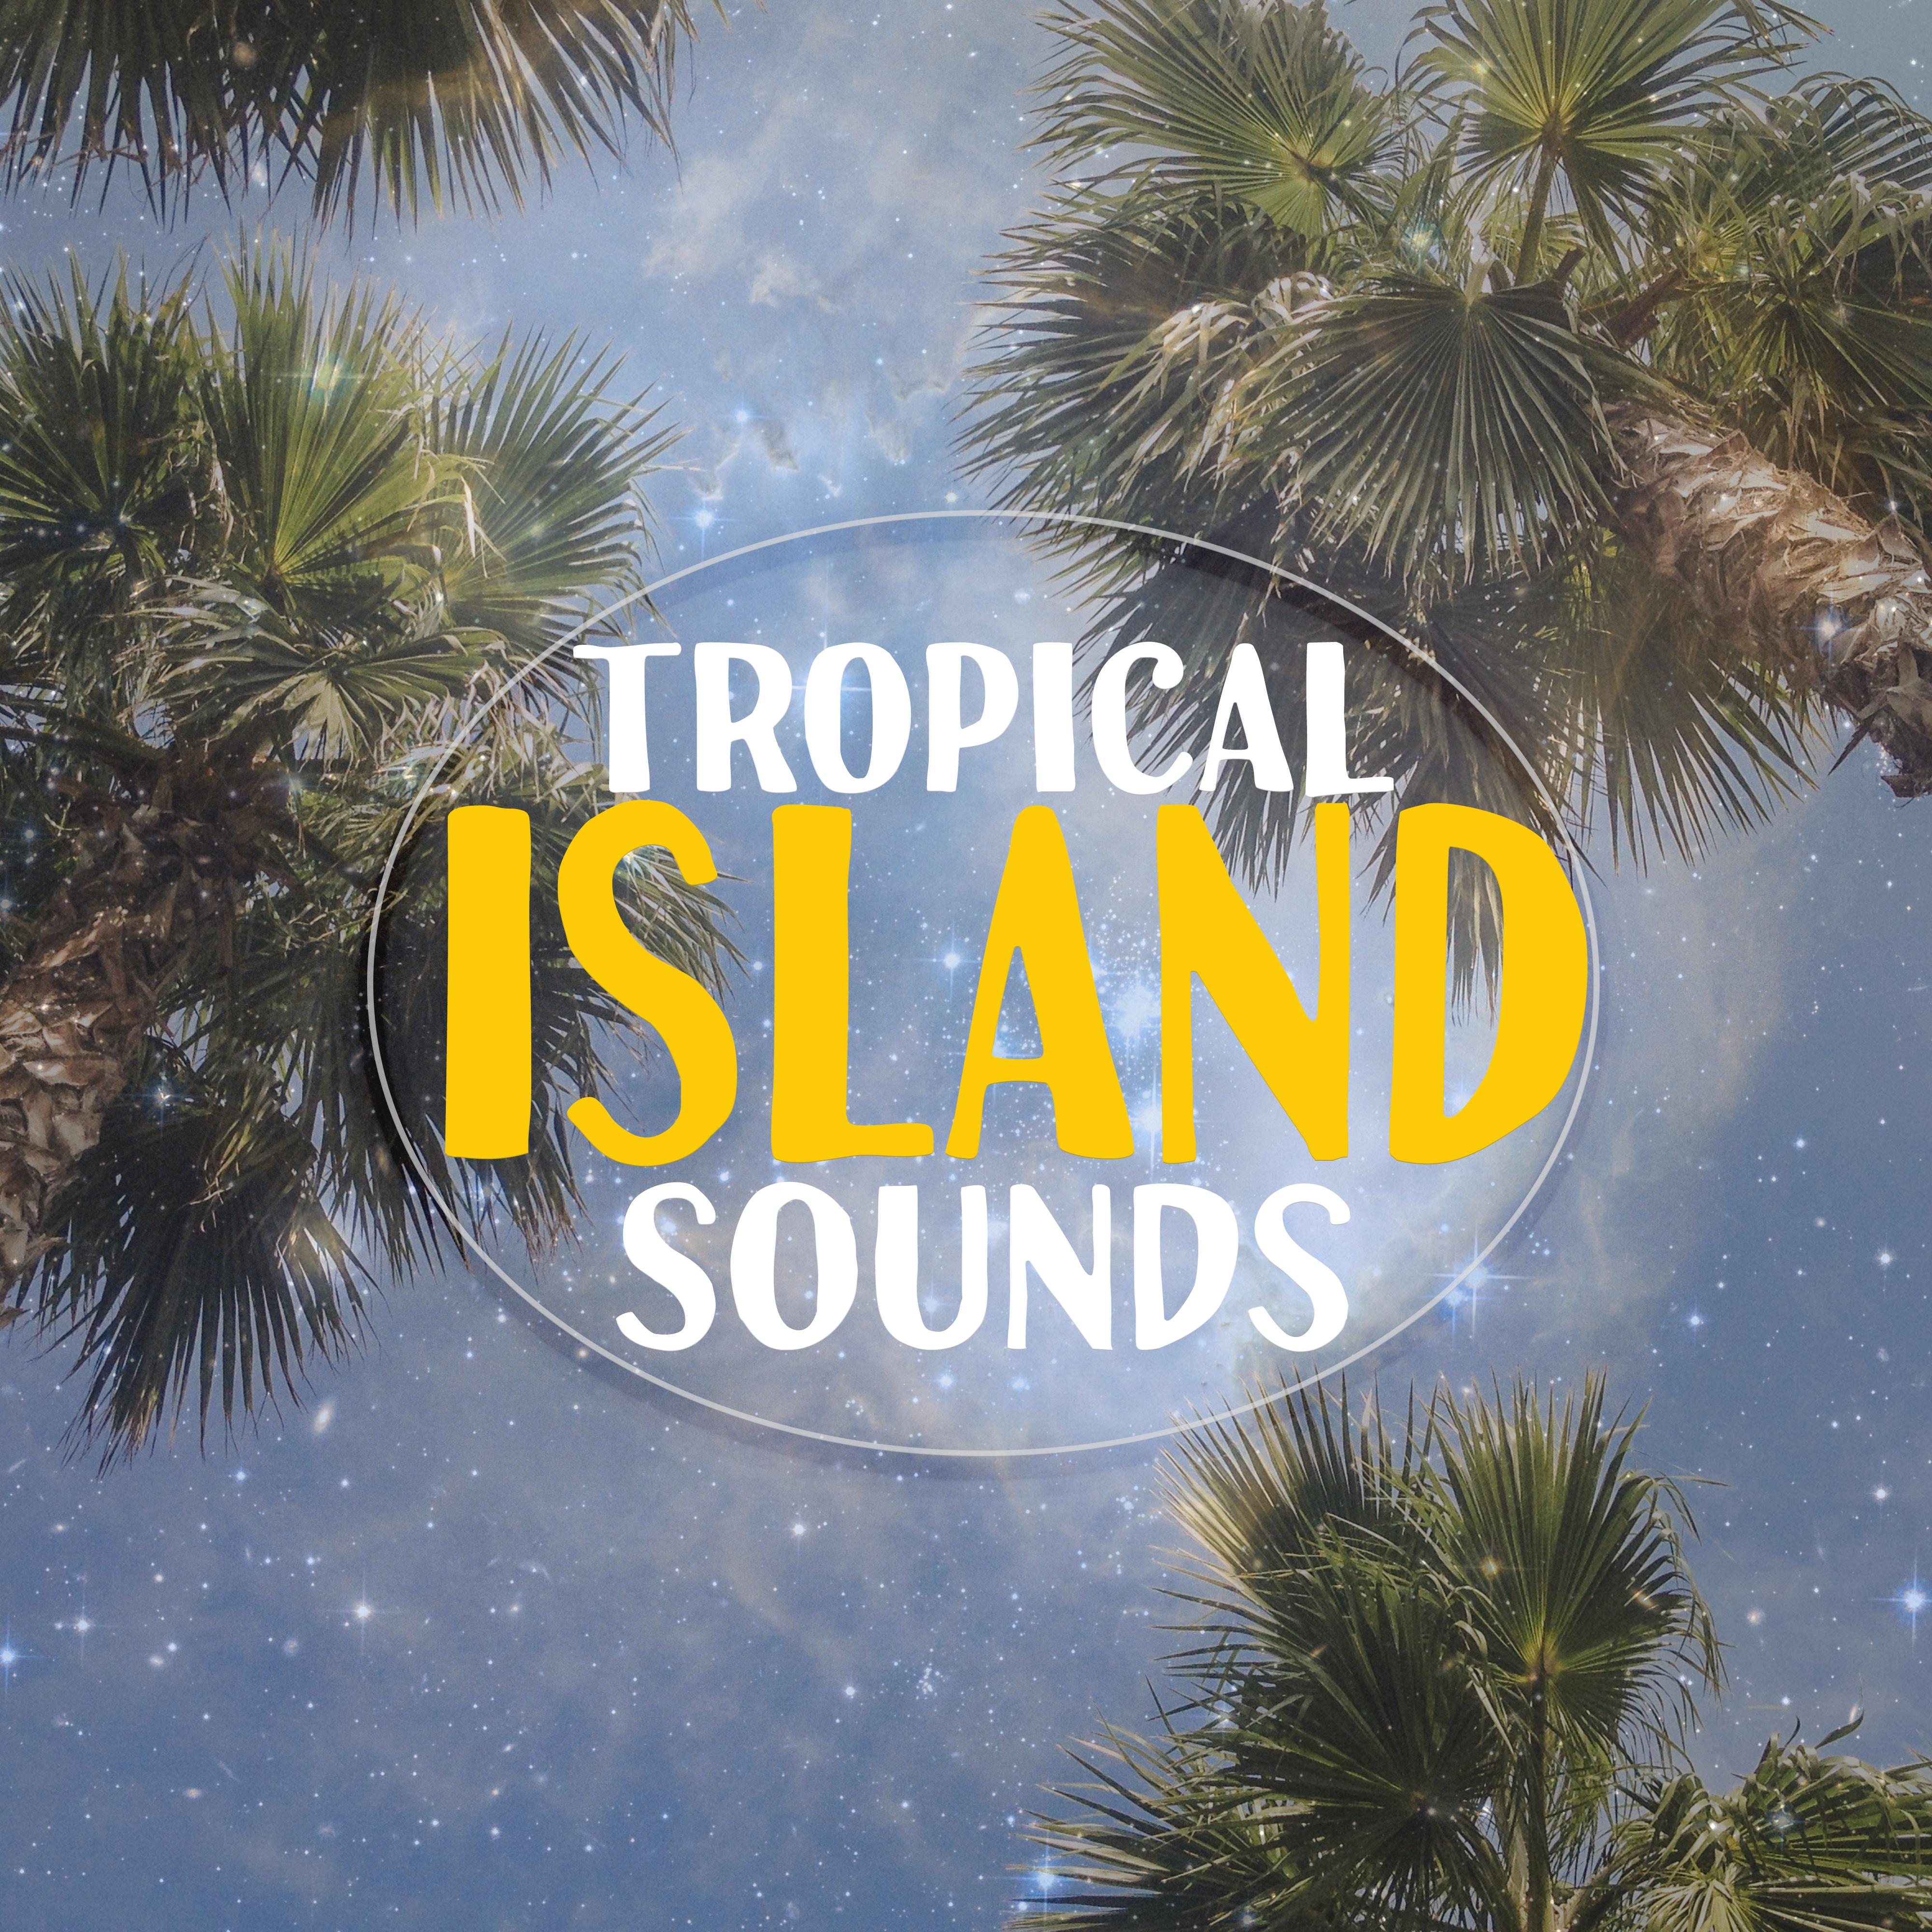 Tropical Island Sounds  Relax on the Beach, Soft Sounds to Calm Down, Ibiza Lounge, Rest Yourself